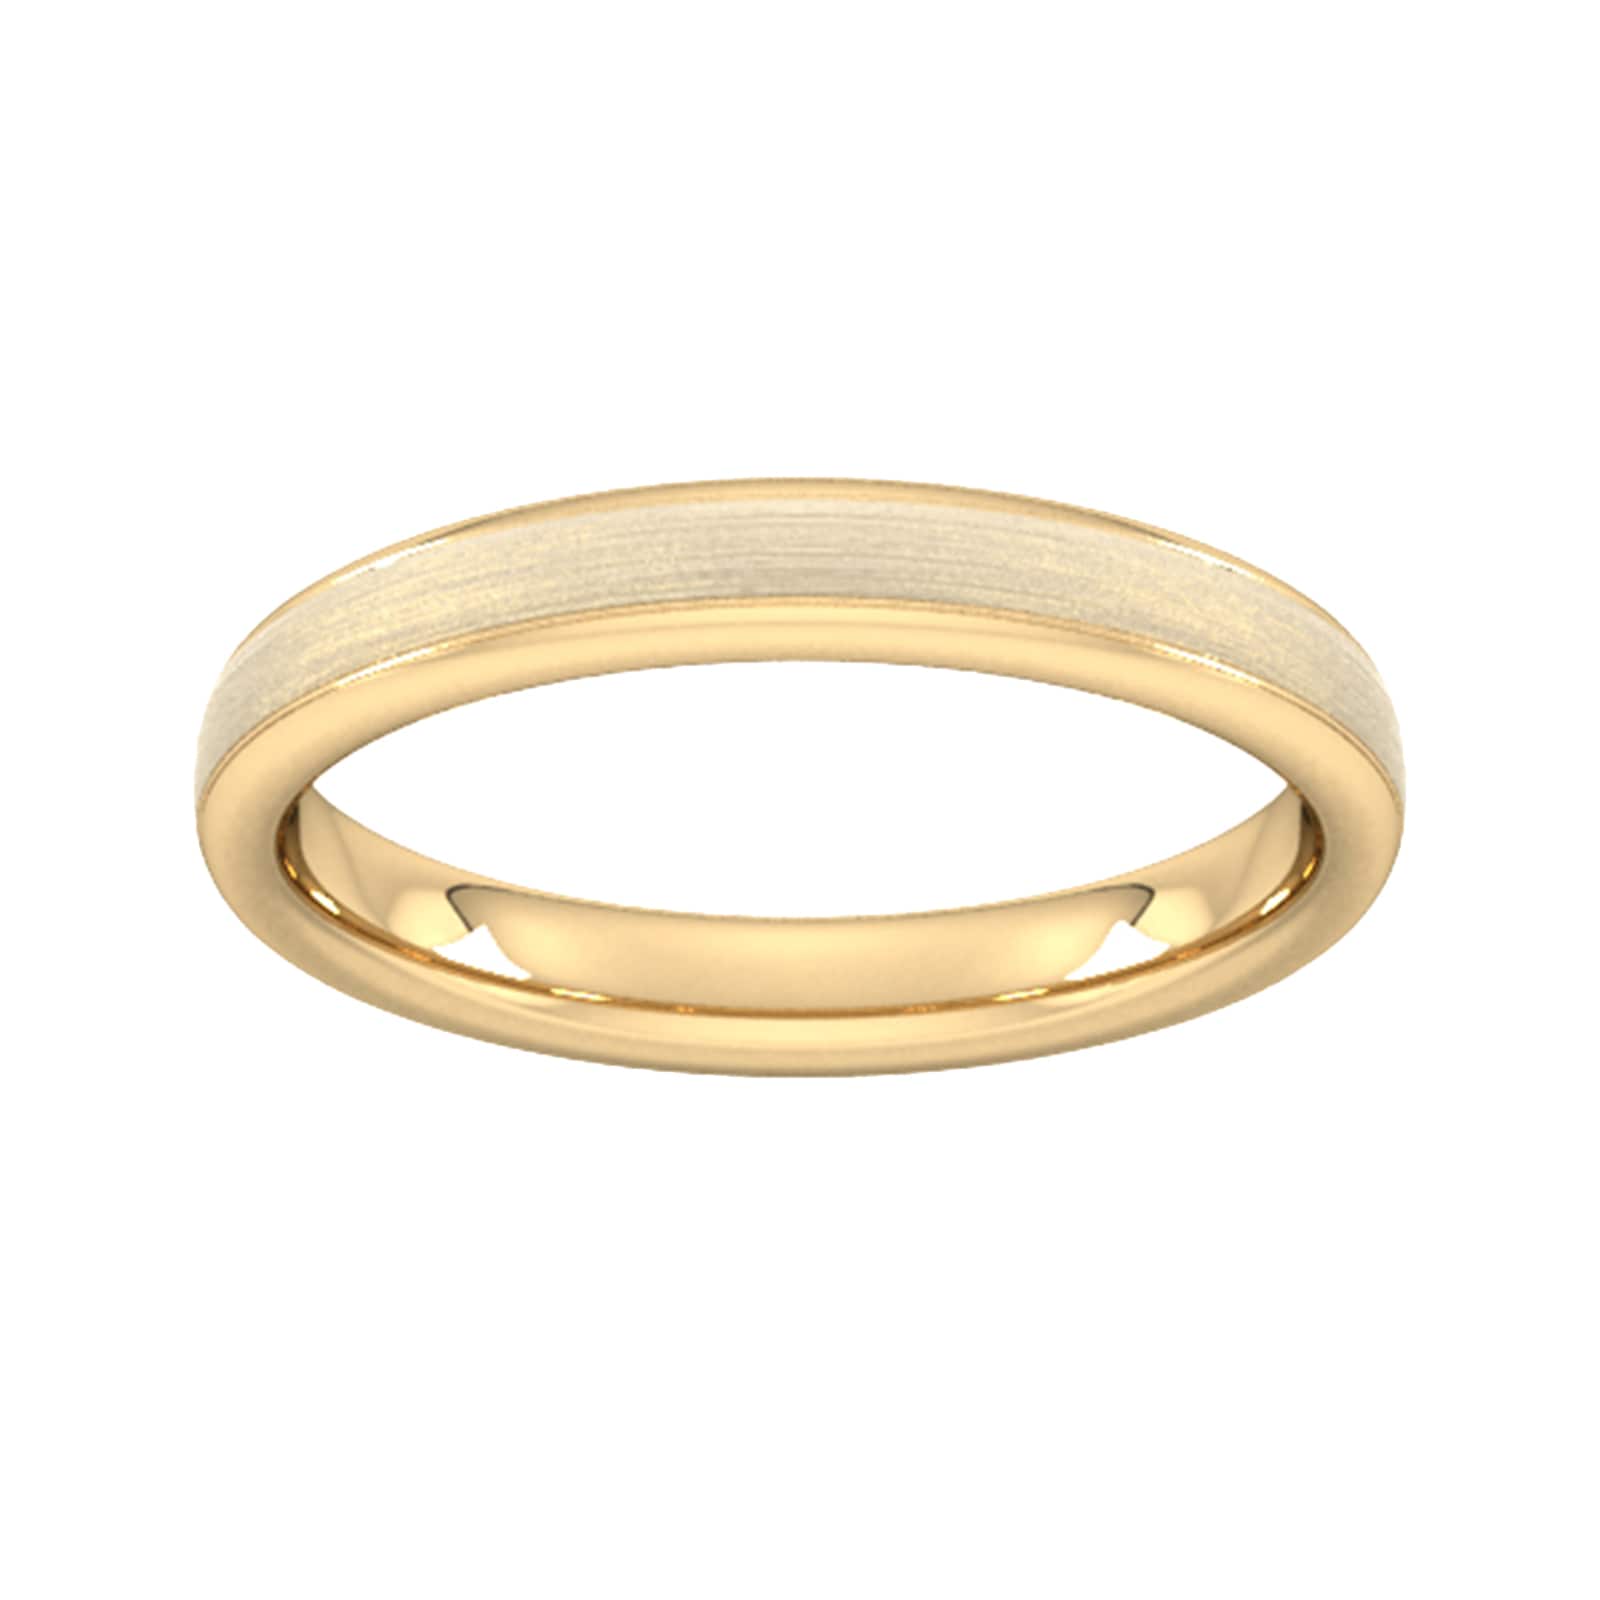 3mm D Shape Heavy Matt Centre With Grooves Wedding Ring In 18 Carat Yellow Gold - Ring Size W